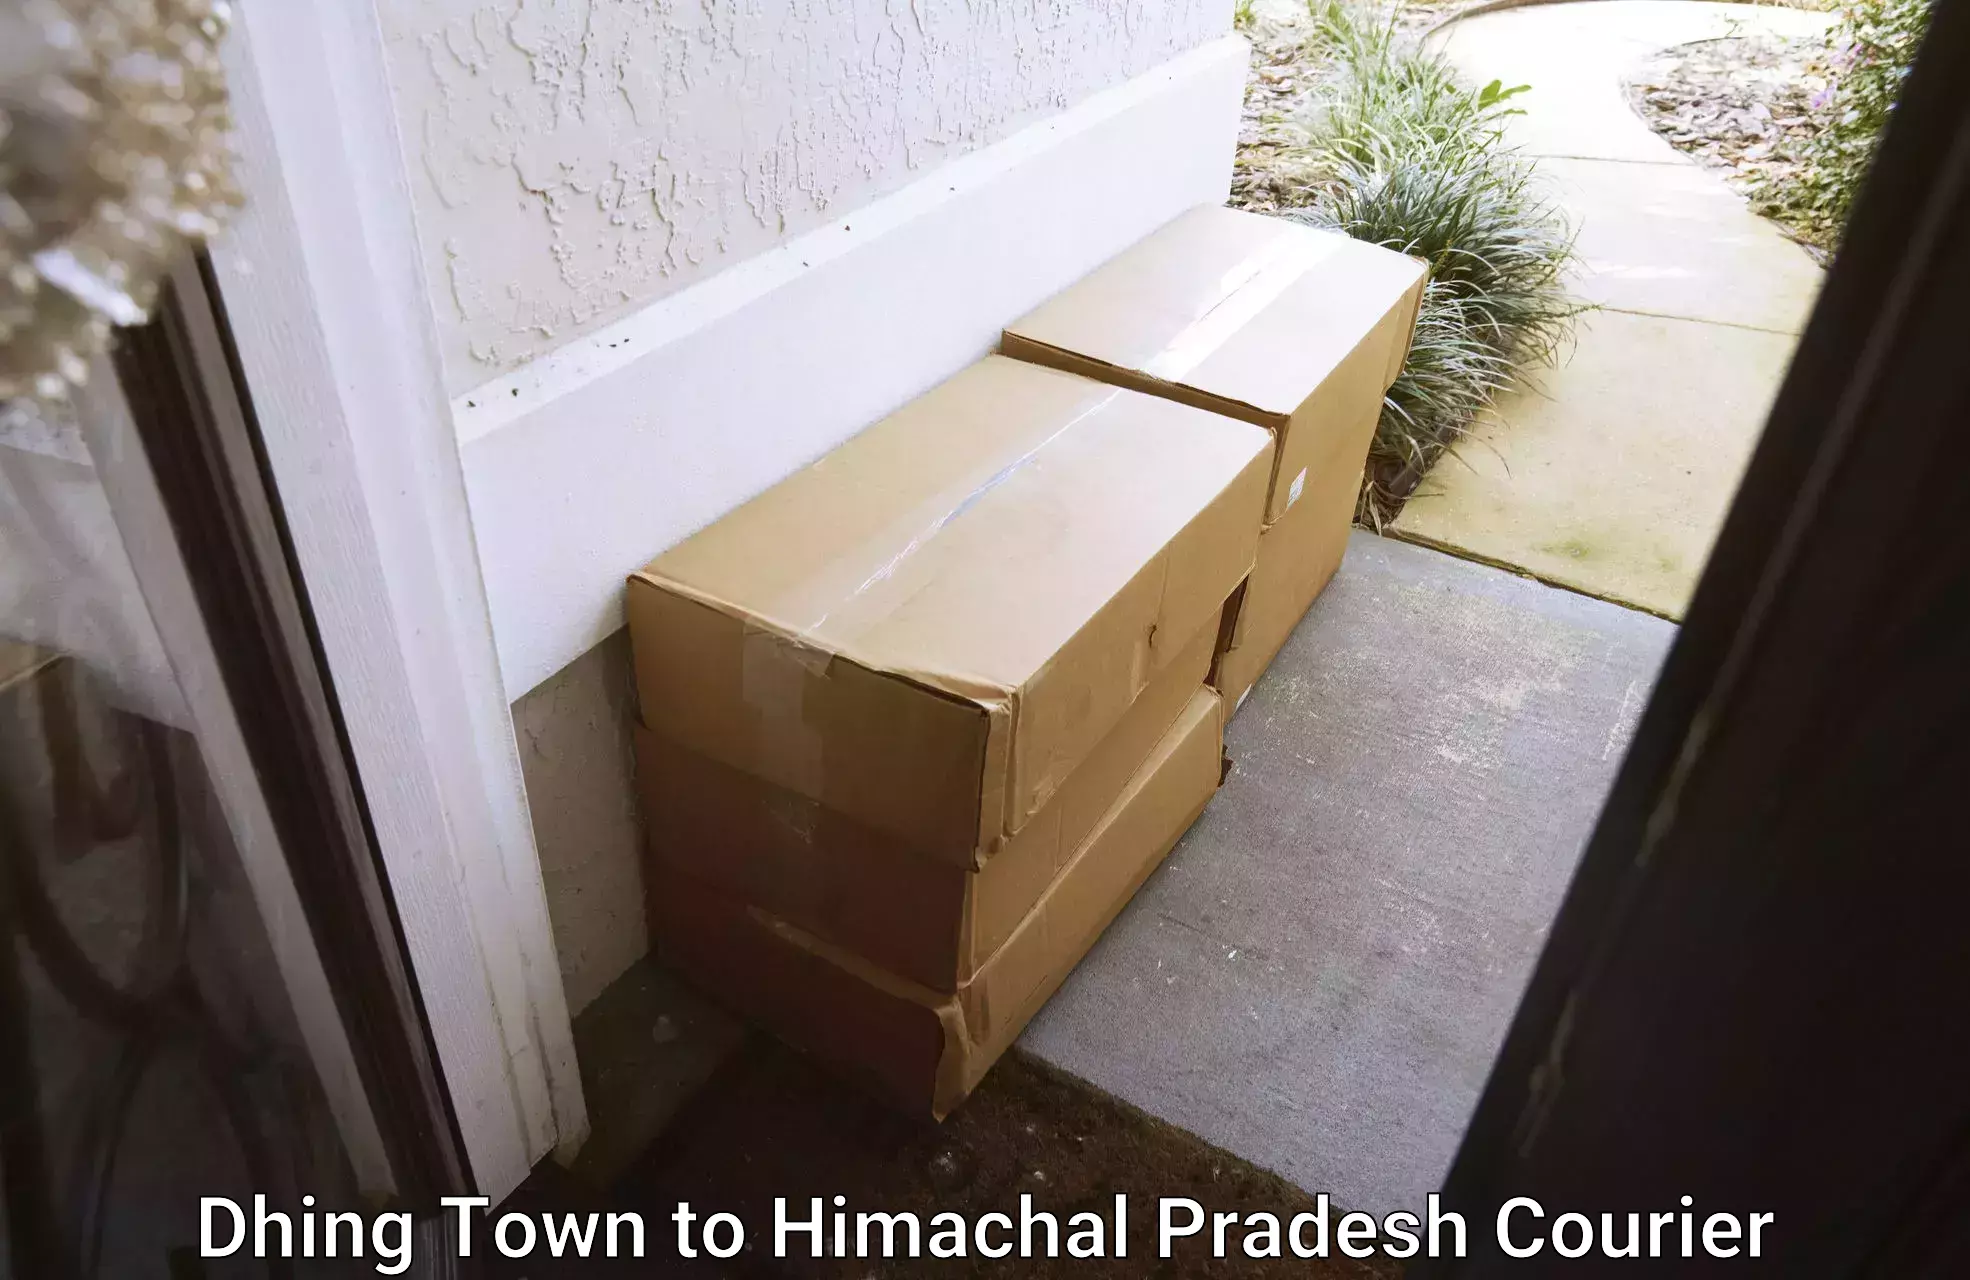 On-demand shipping options Dhing Town to Himachal Pradesh